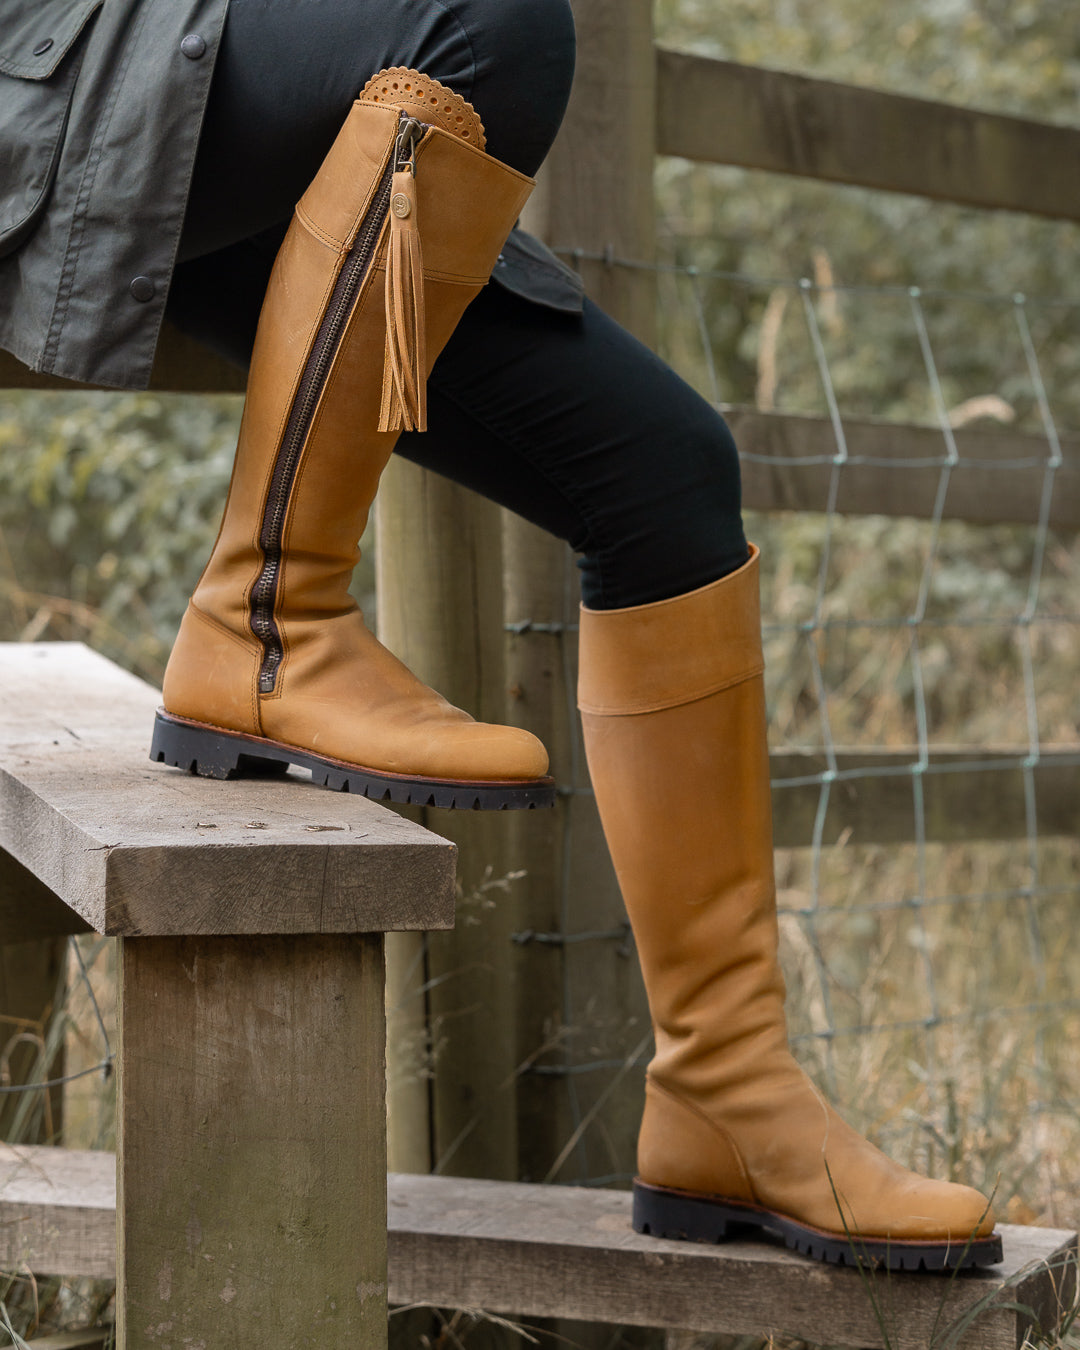 Elegance Meets Functionality for Handmade Leather & Suede Boots ...